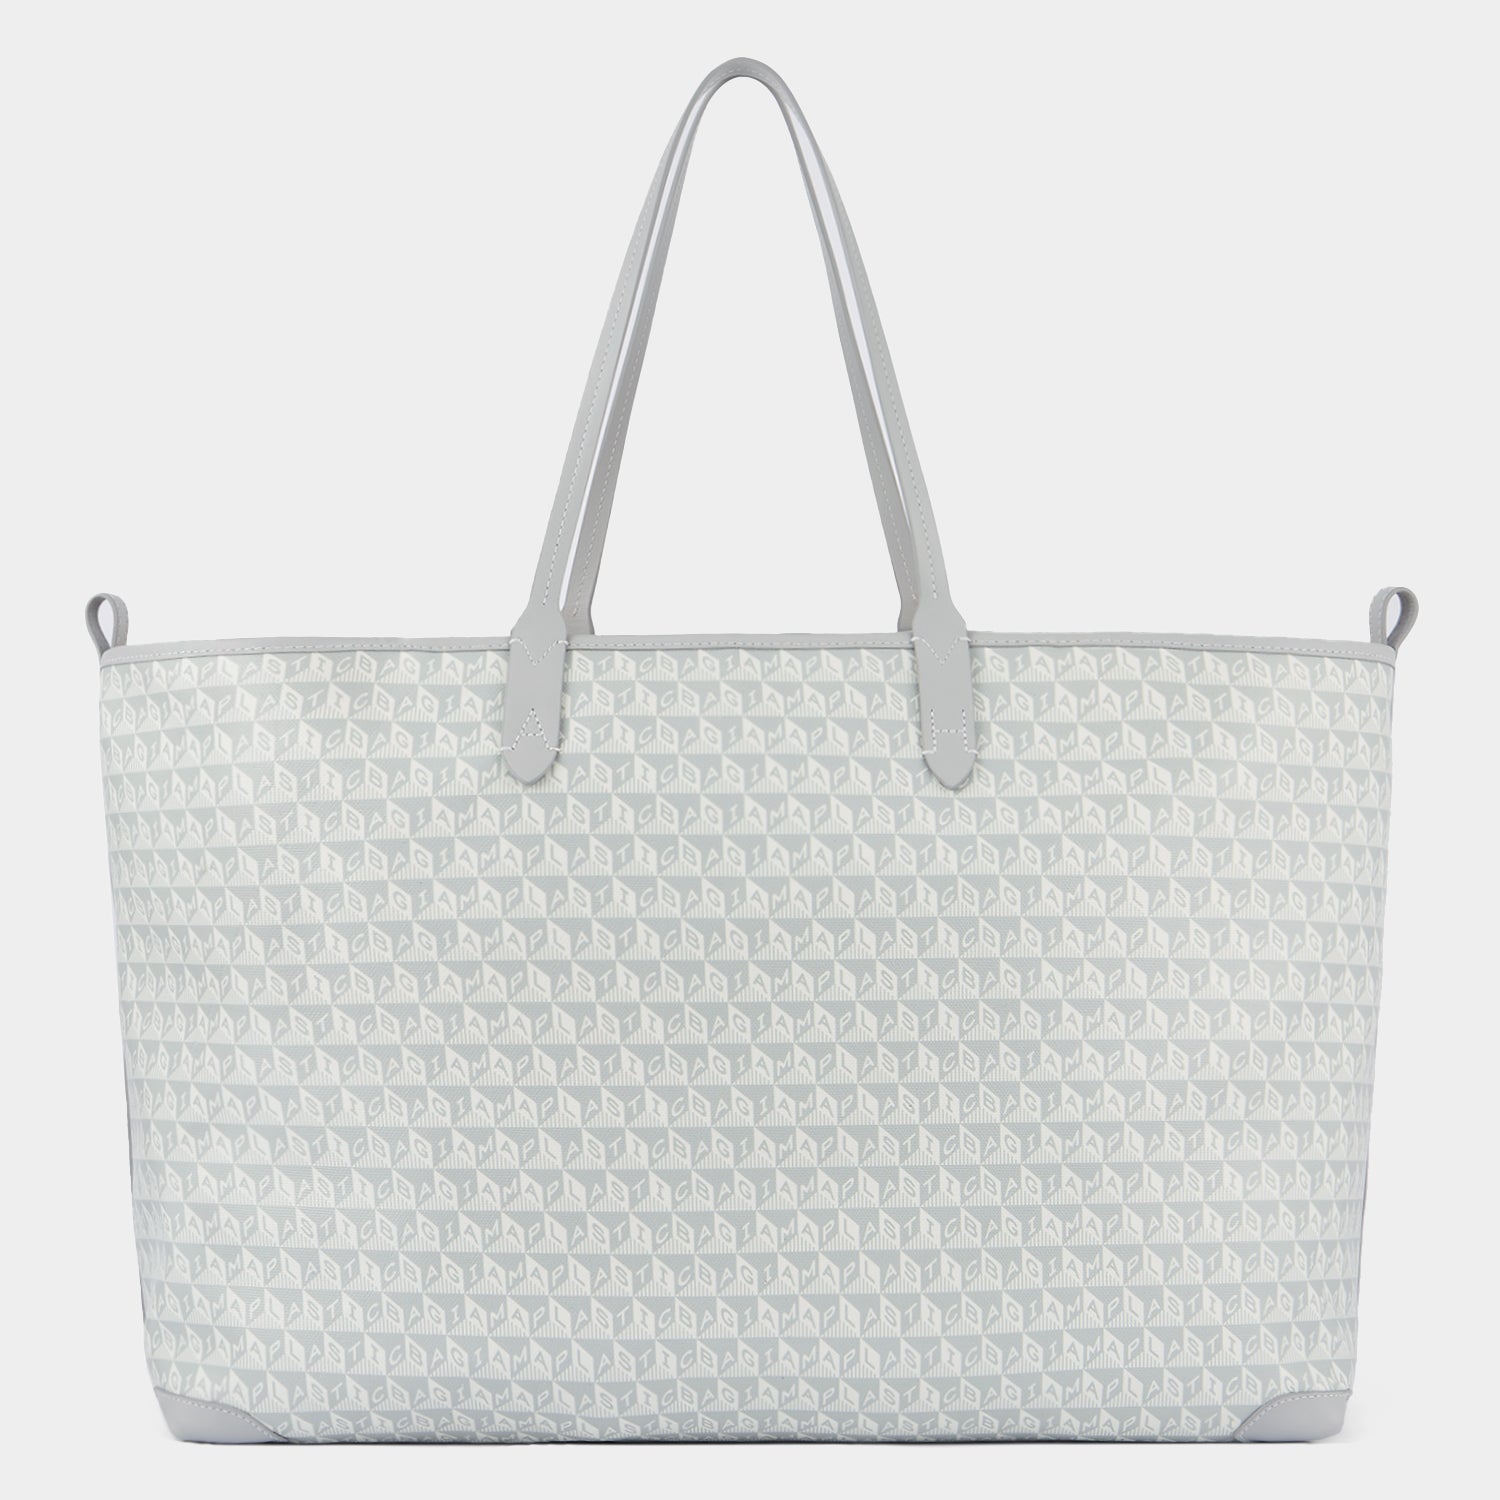 I am a Plastic Bag Wink XL Tote -

                  
                    Recycled Canvas in Frost -
                  

                  Anya Hindmarch EU
